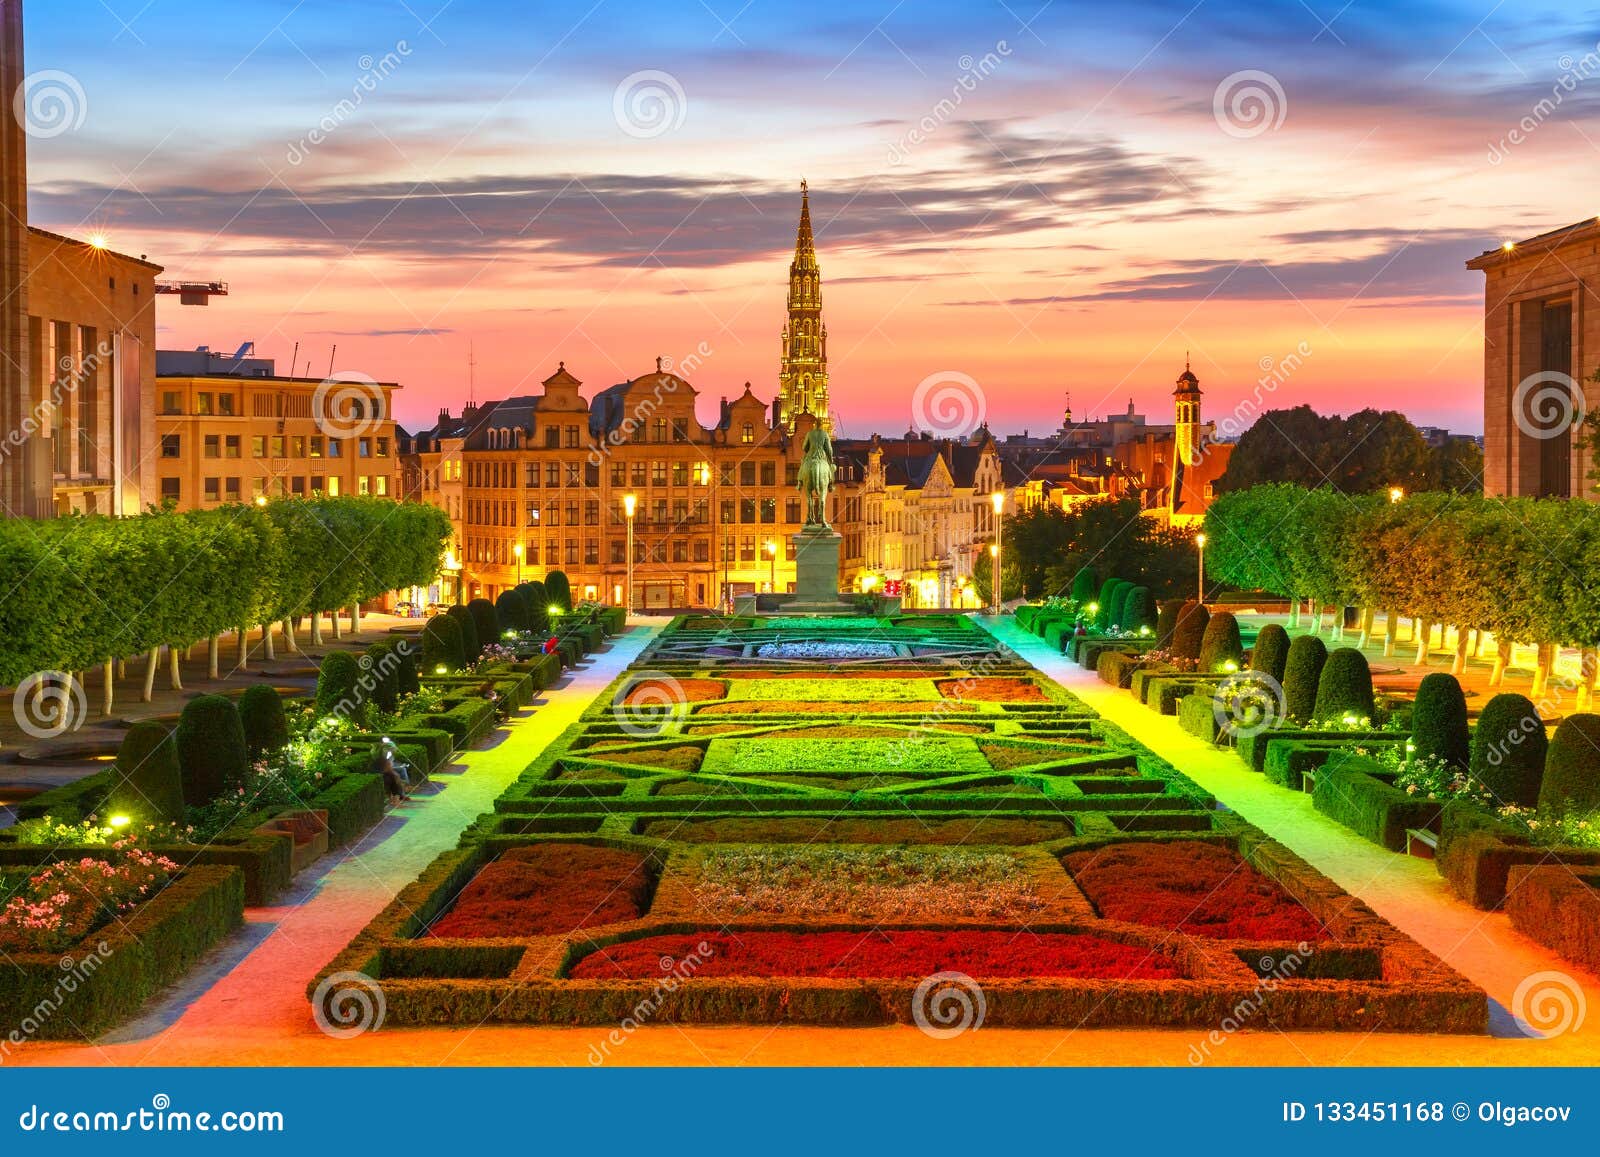 Grand Place Brussels Stock Photo - Download Image Now - iStock